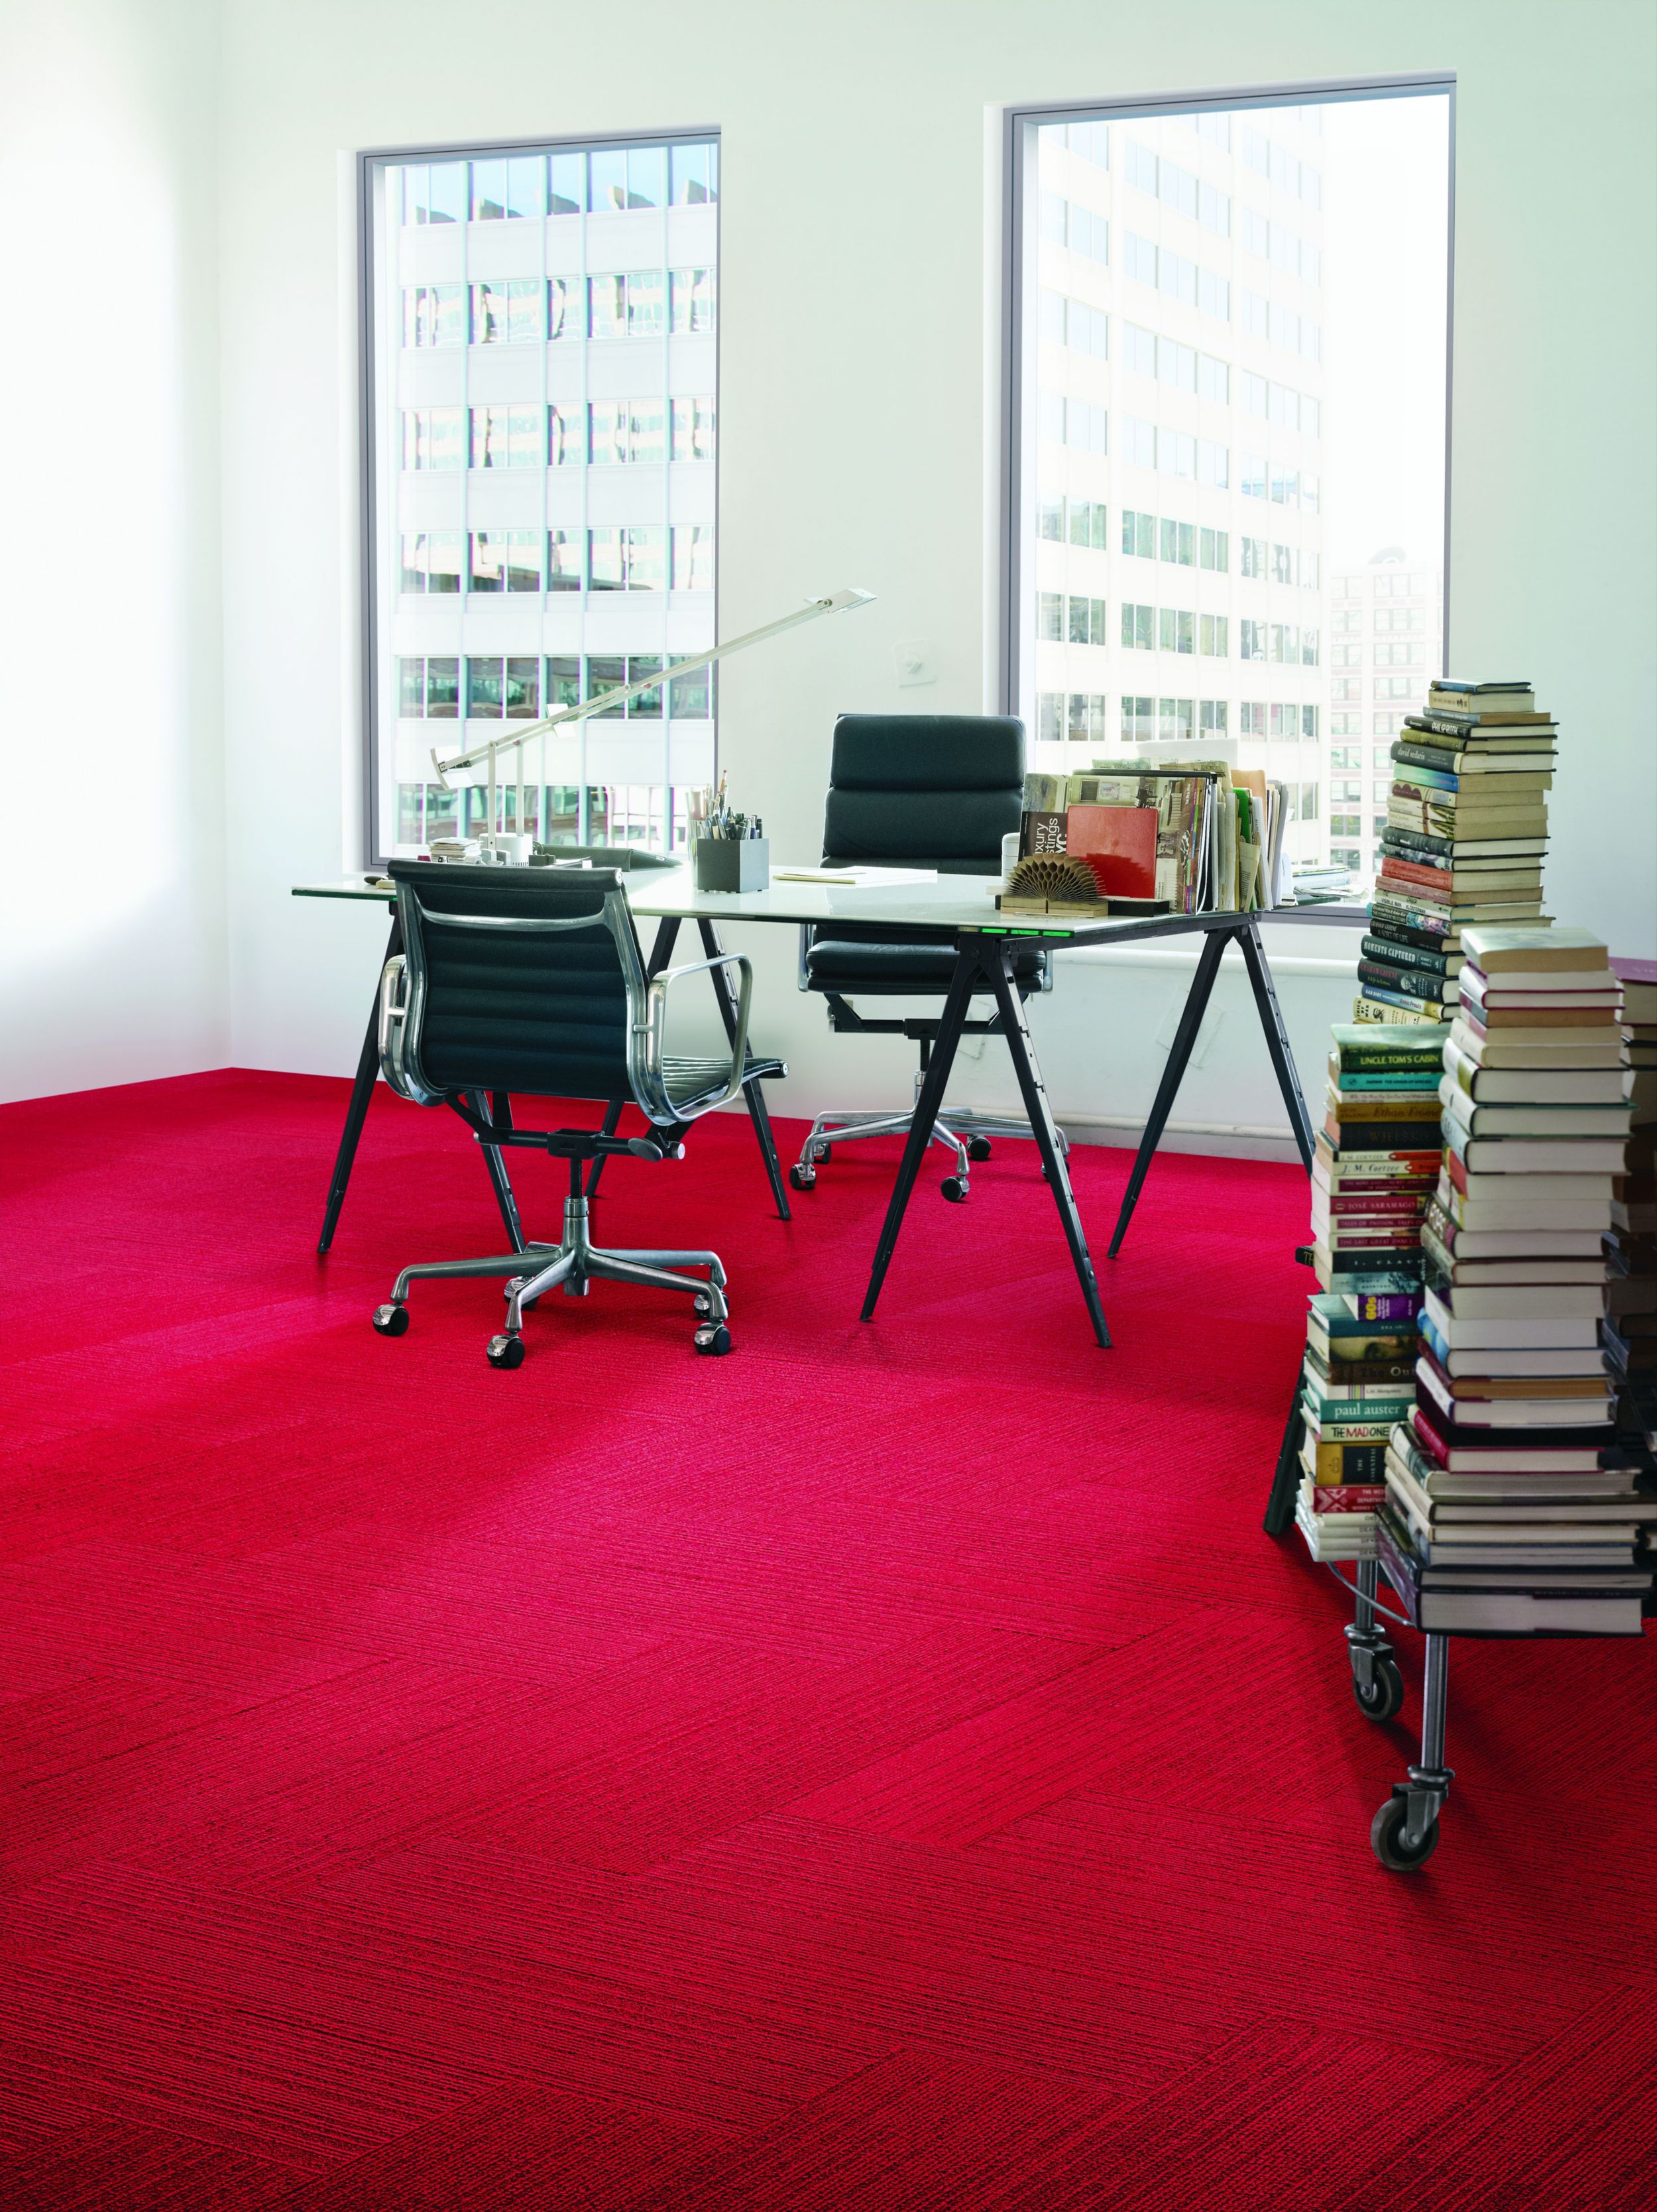 Interface On Line plank carpet tile in space with desk and stacks of books against wall imagen número 2